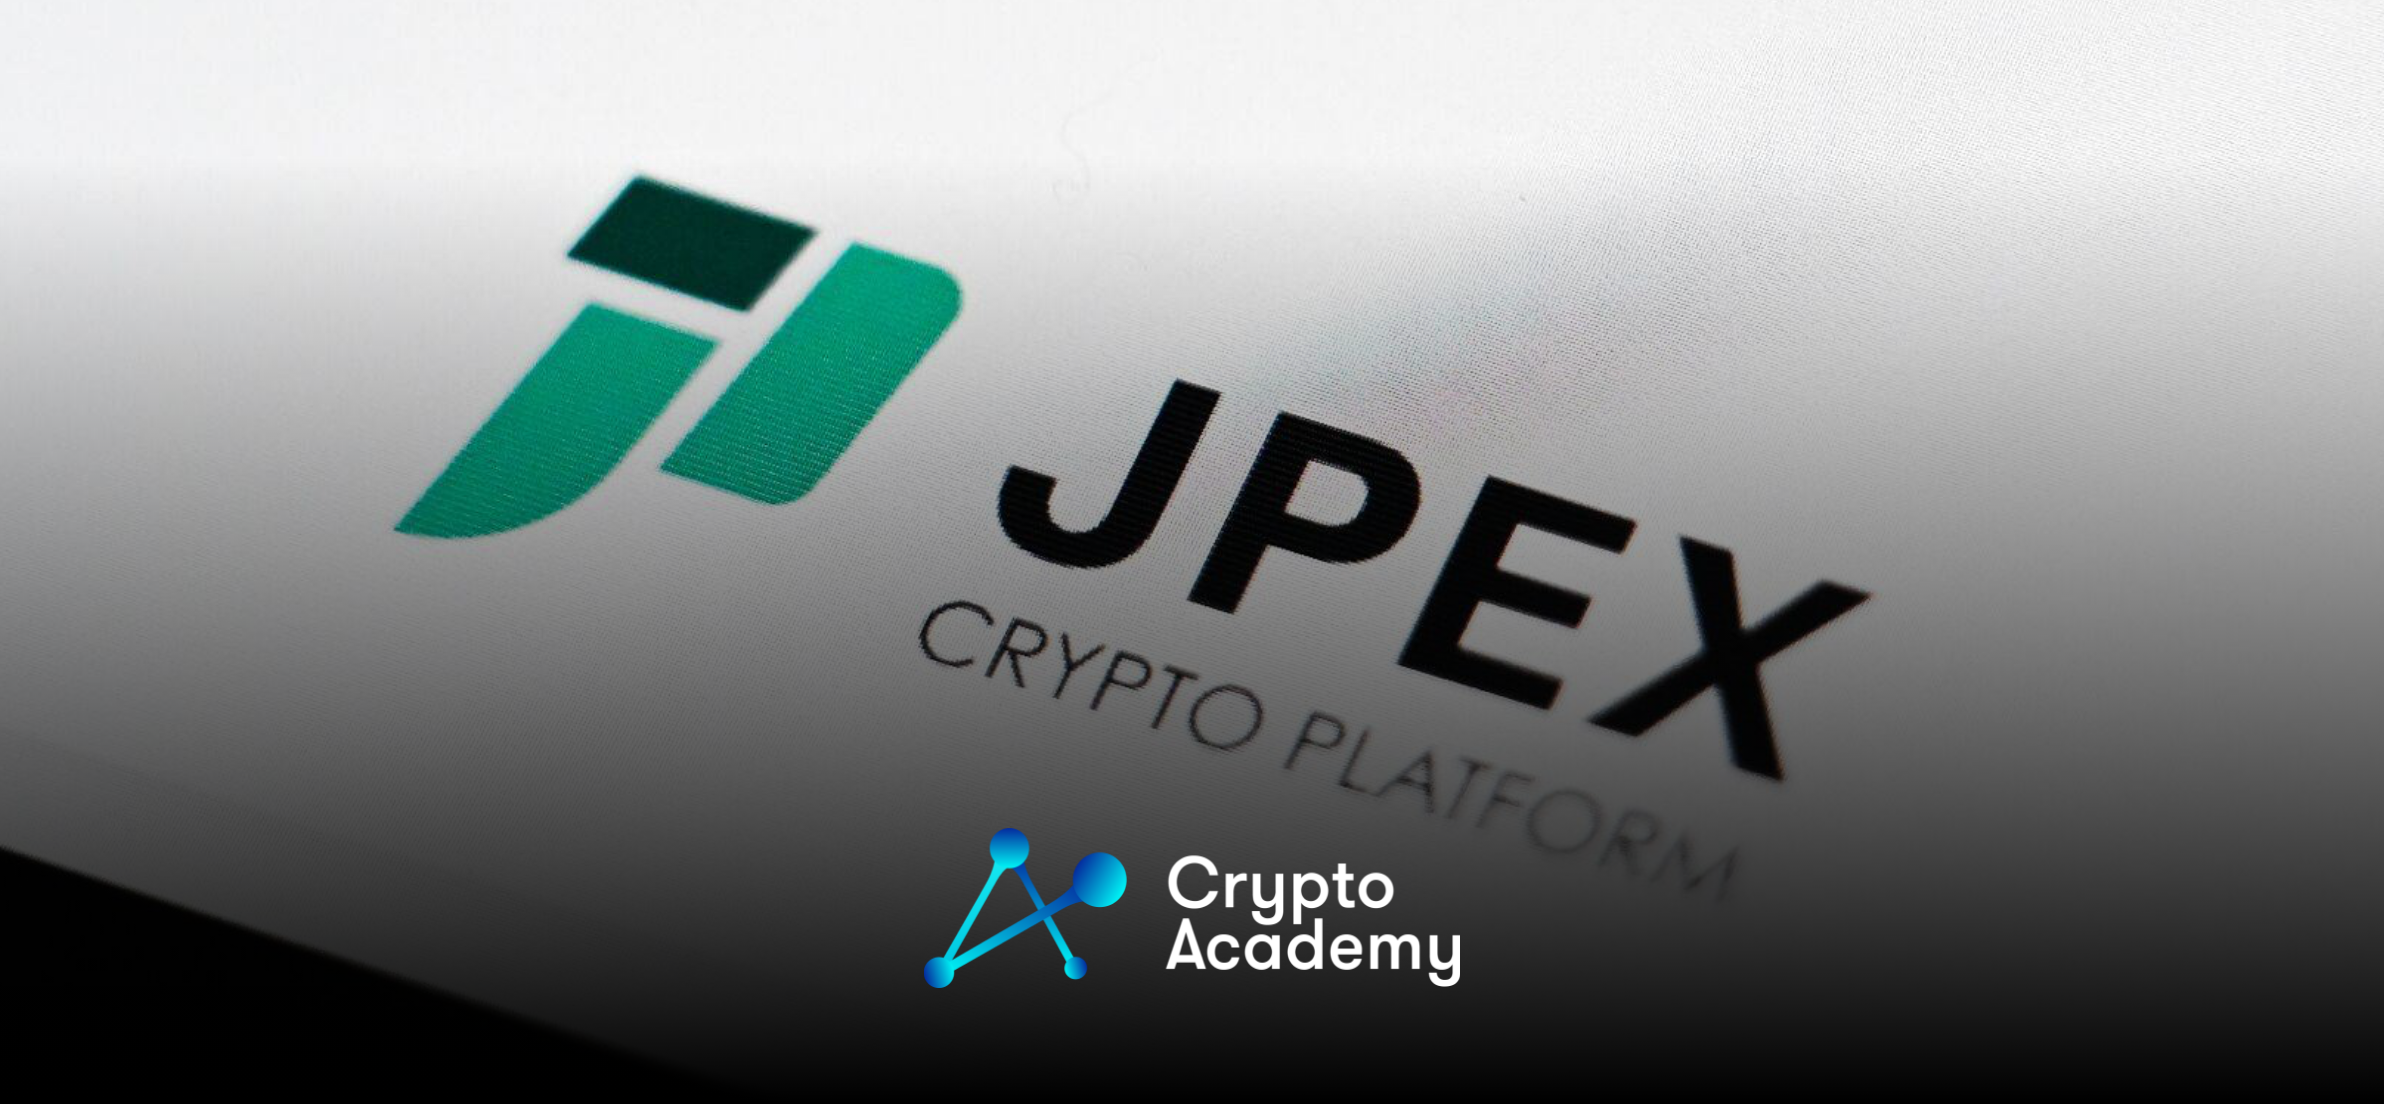 JPEX Crypto Scandal - Everything You Need to Know So Far